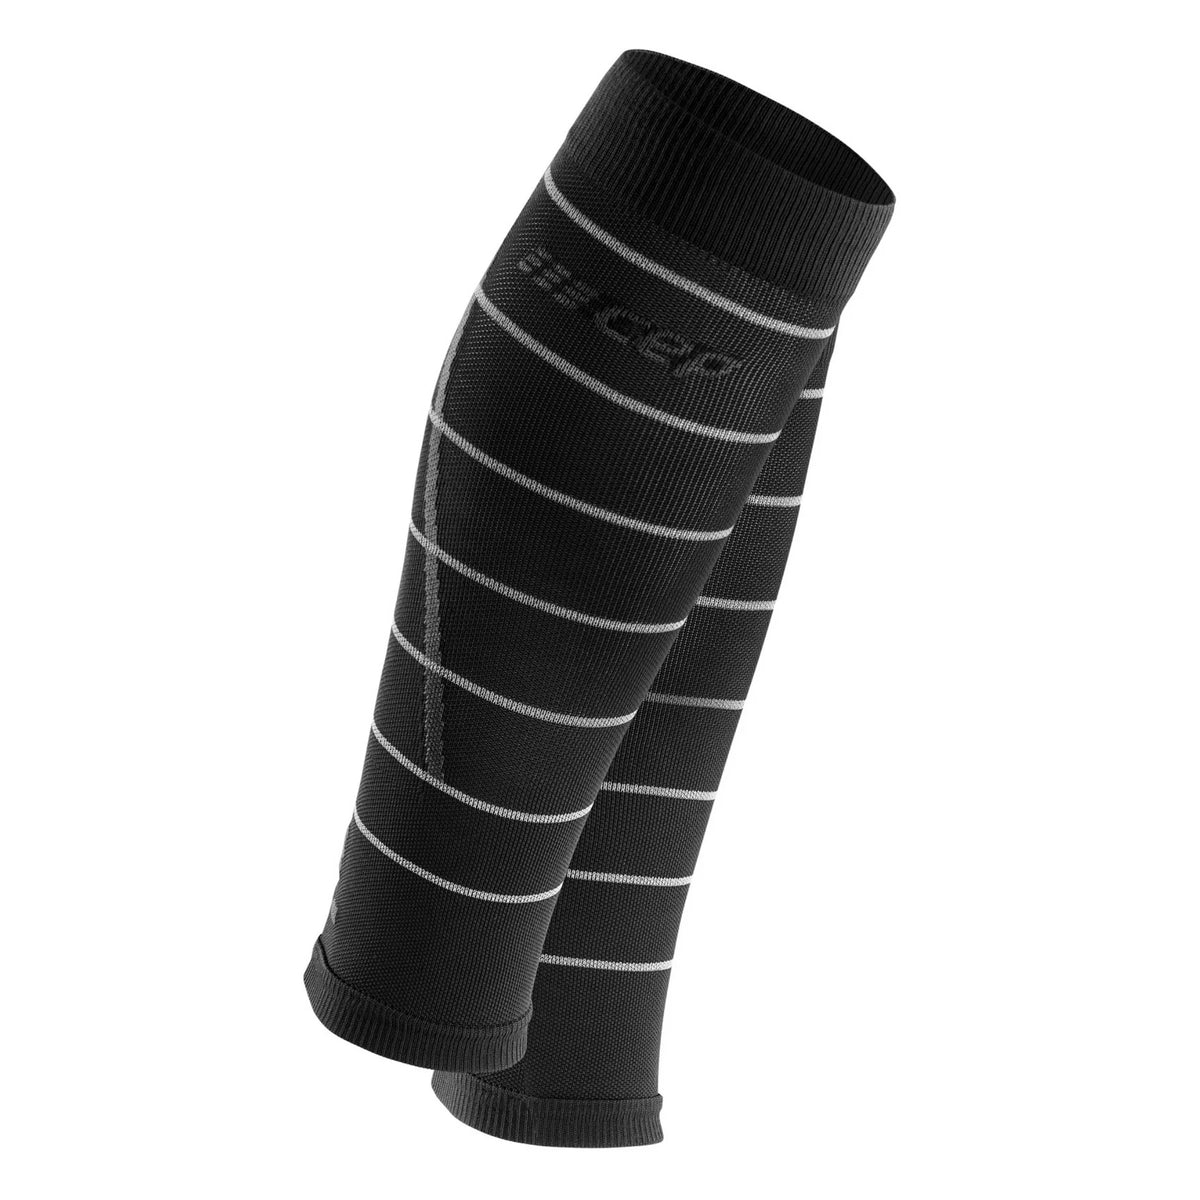 Women's CEP Reflective Compression Calf Sleeves